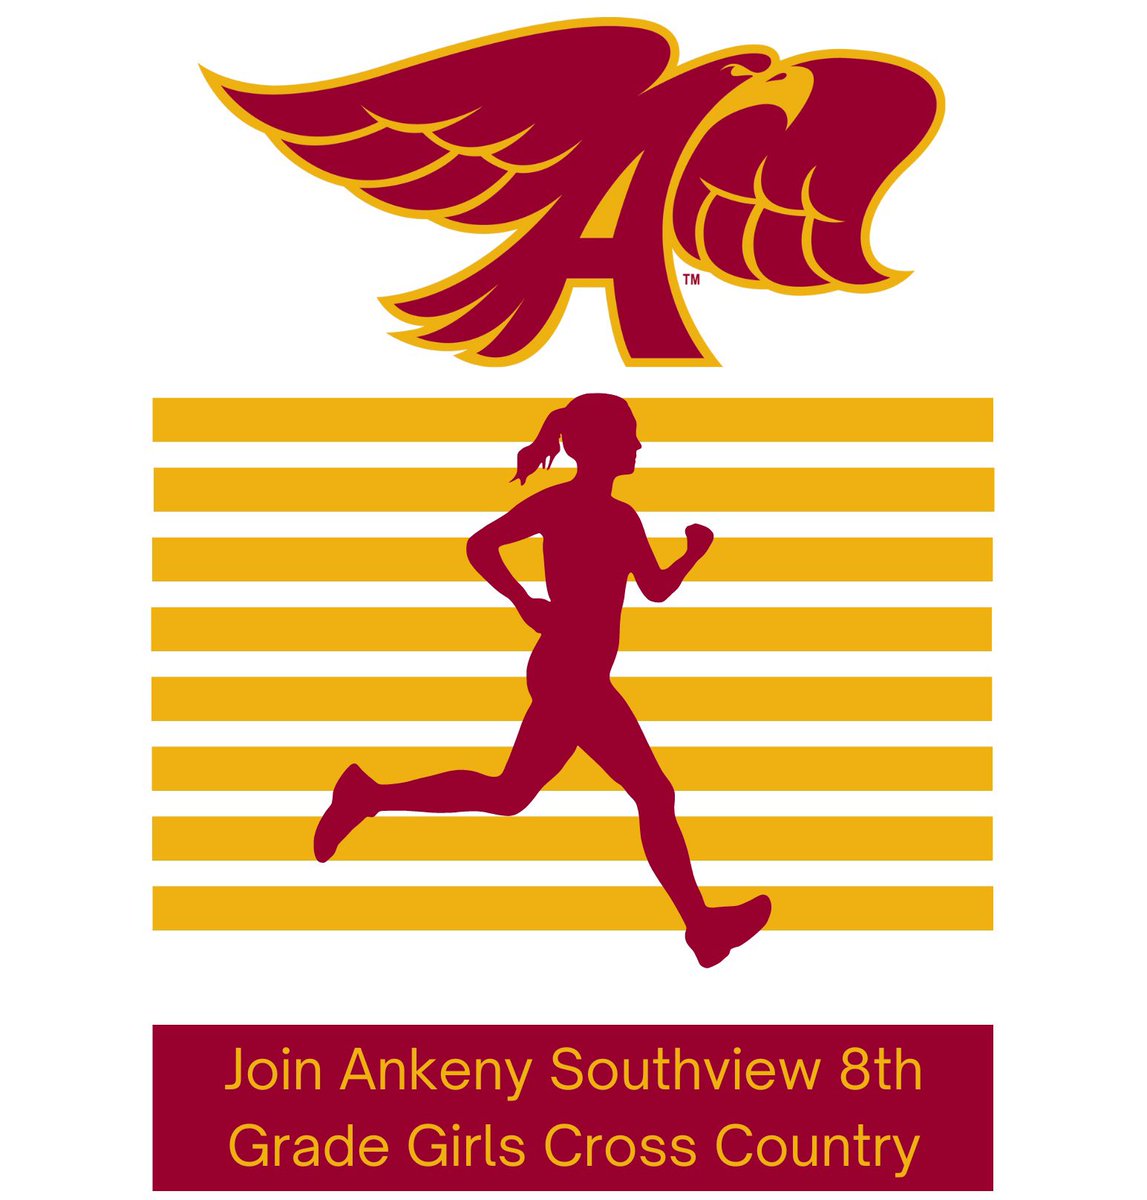 Know an @AnkenySouthview 8th grader who is looking for a fun fall activity and wants to be part of a supportive team? Check out @Ankeny8GirlsXC and give cross-country a try!! Contact Coach Lorenz (Room 2209) or Coach Luttenegger (2211) at Southview for more info!! 🏃🏽‍♀️